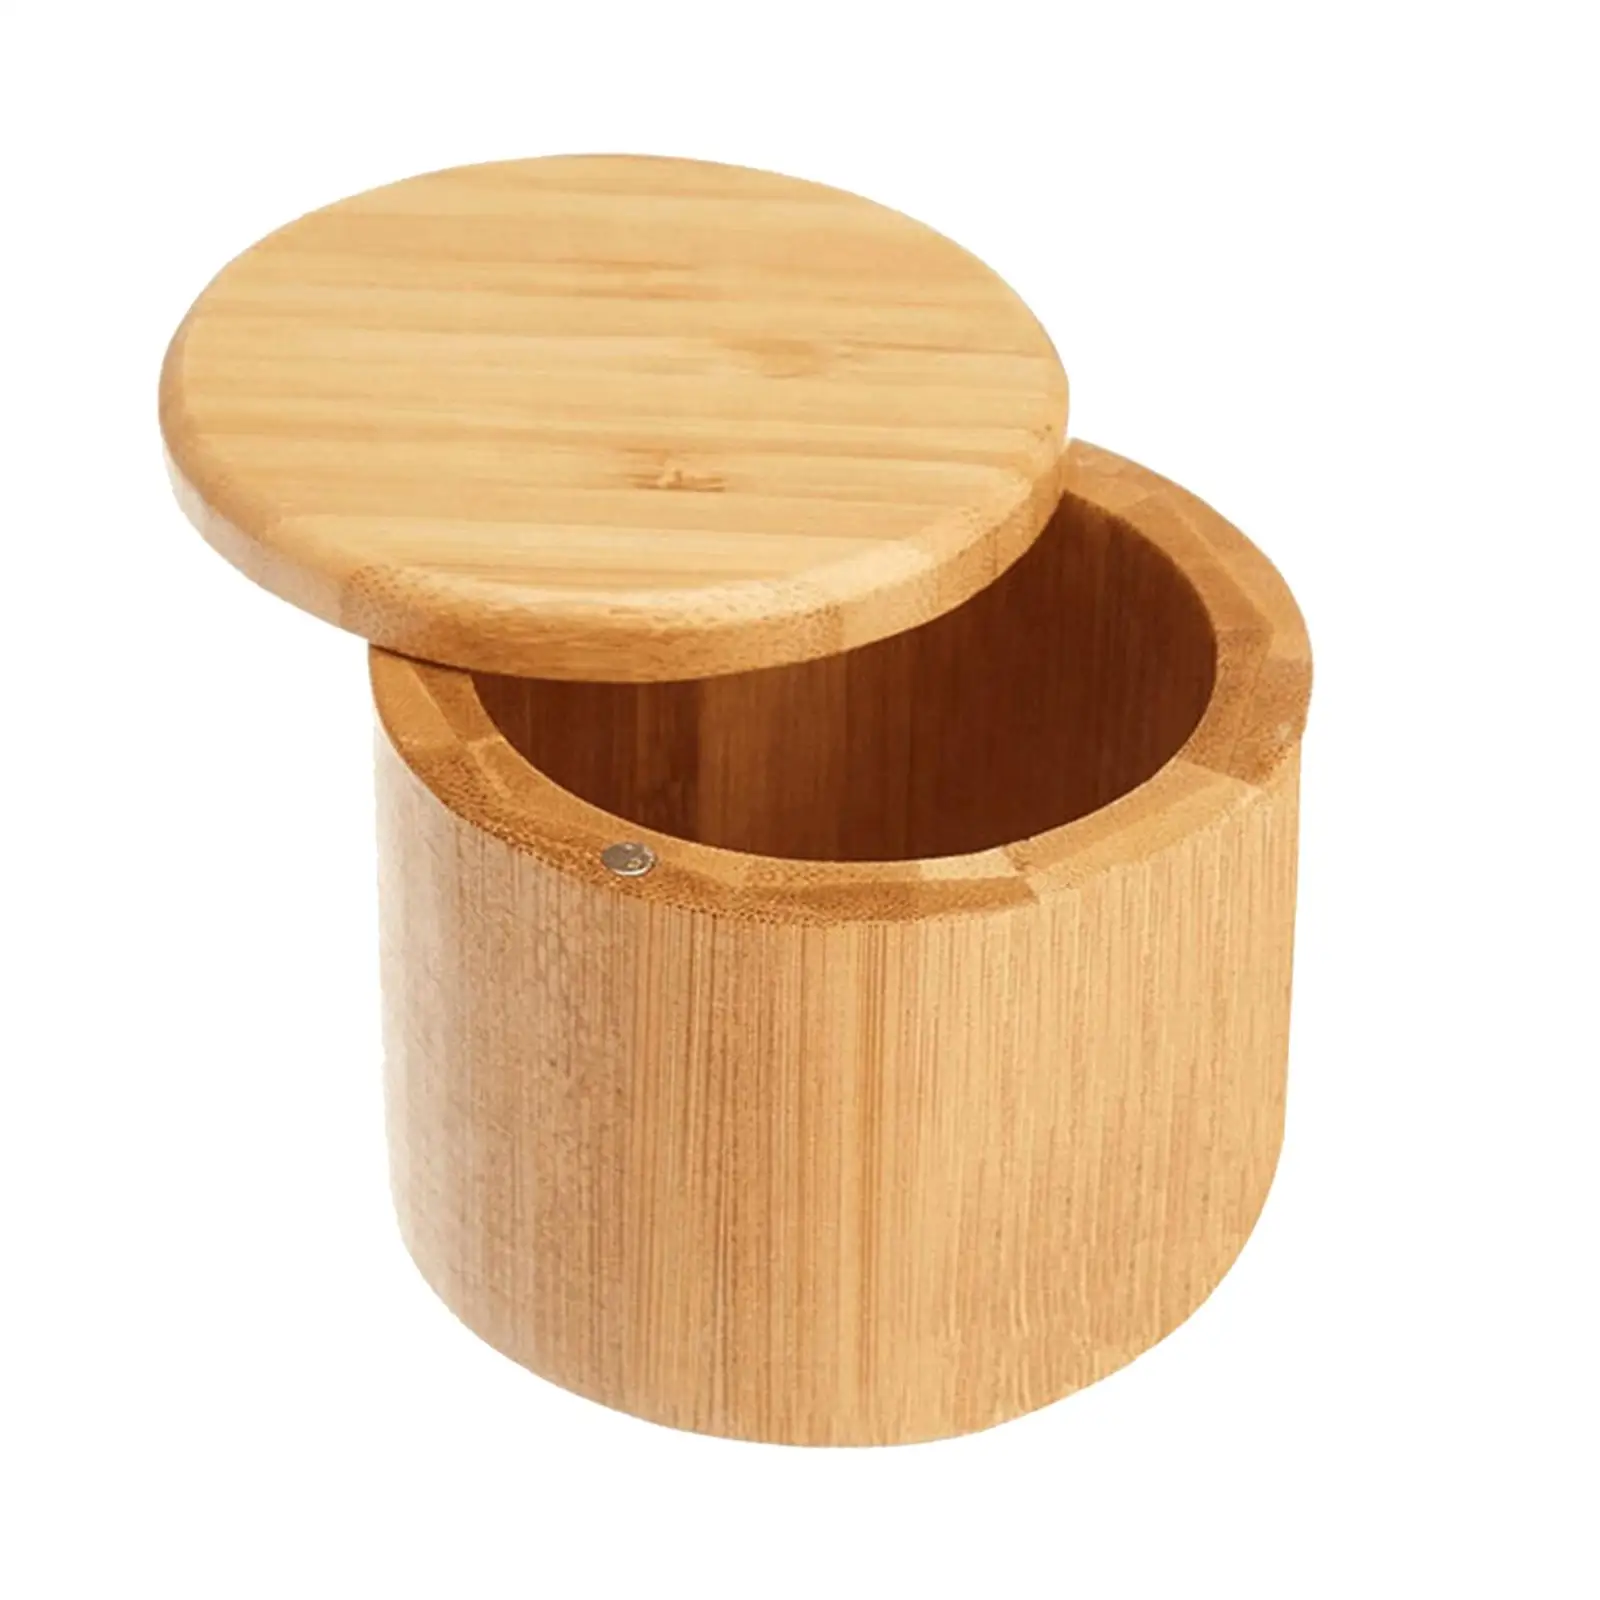 Seasoning Box Kitchen Tool Sugar Bowl Bamboo Pepper Salt Box Storage Canister for Baking Parties Household Kitchens Hotels